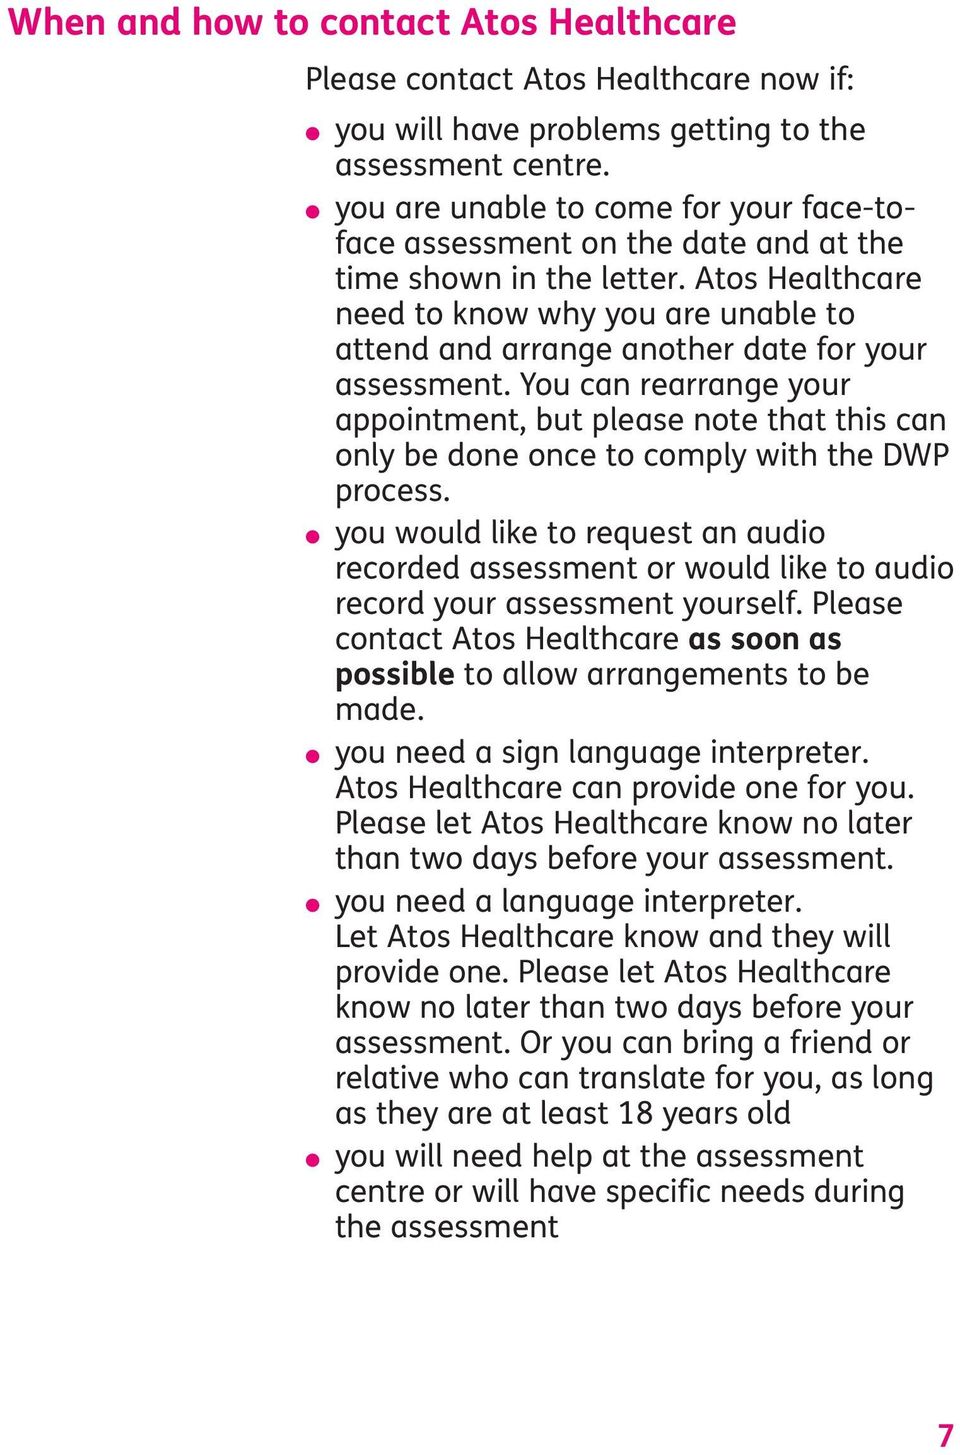 Atos Healthcare need to know why you are unable to attend and arrange another date for your assessment.